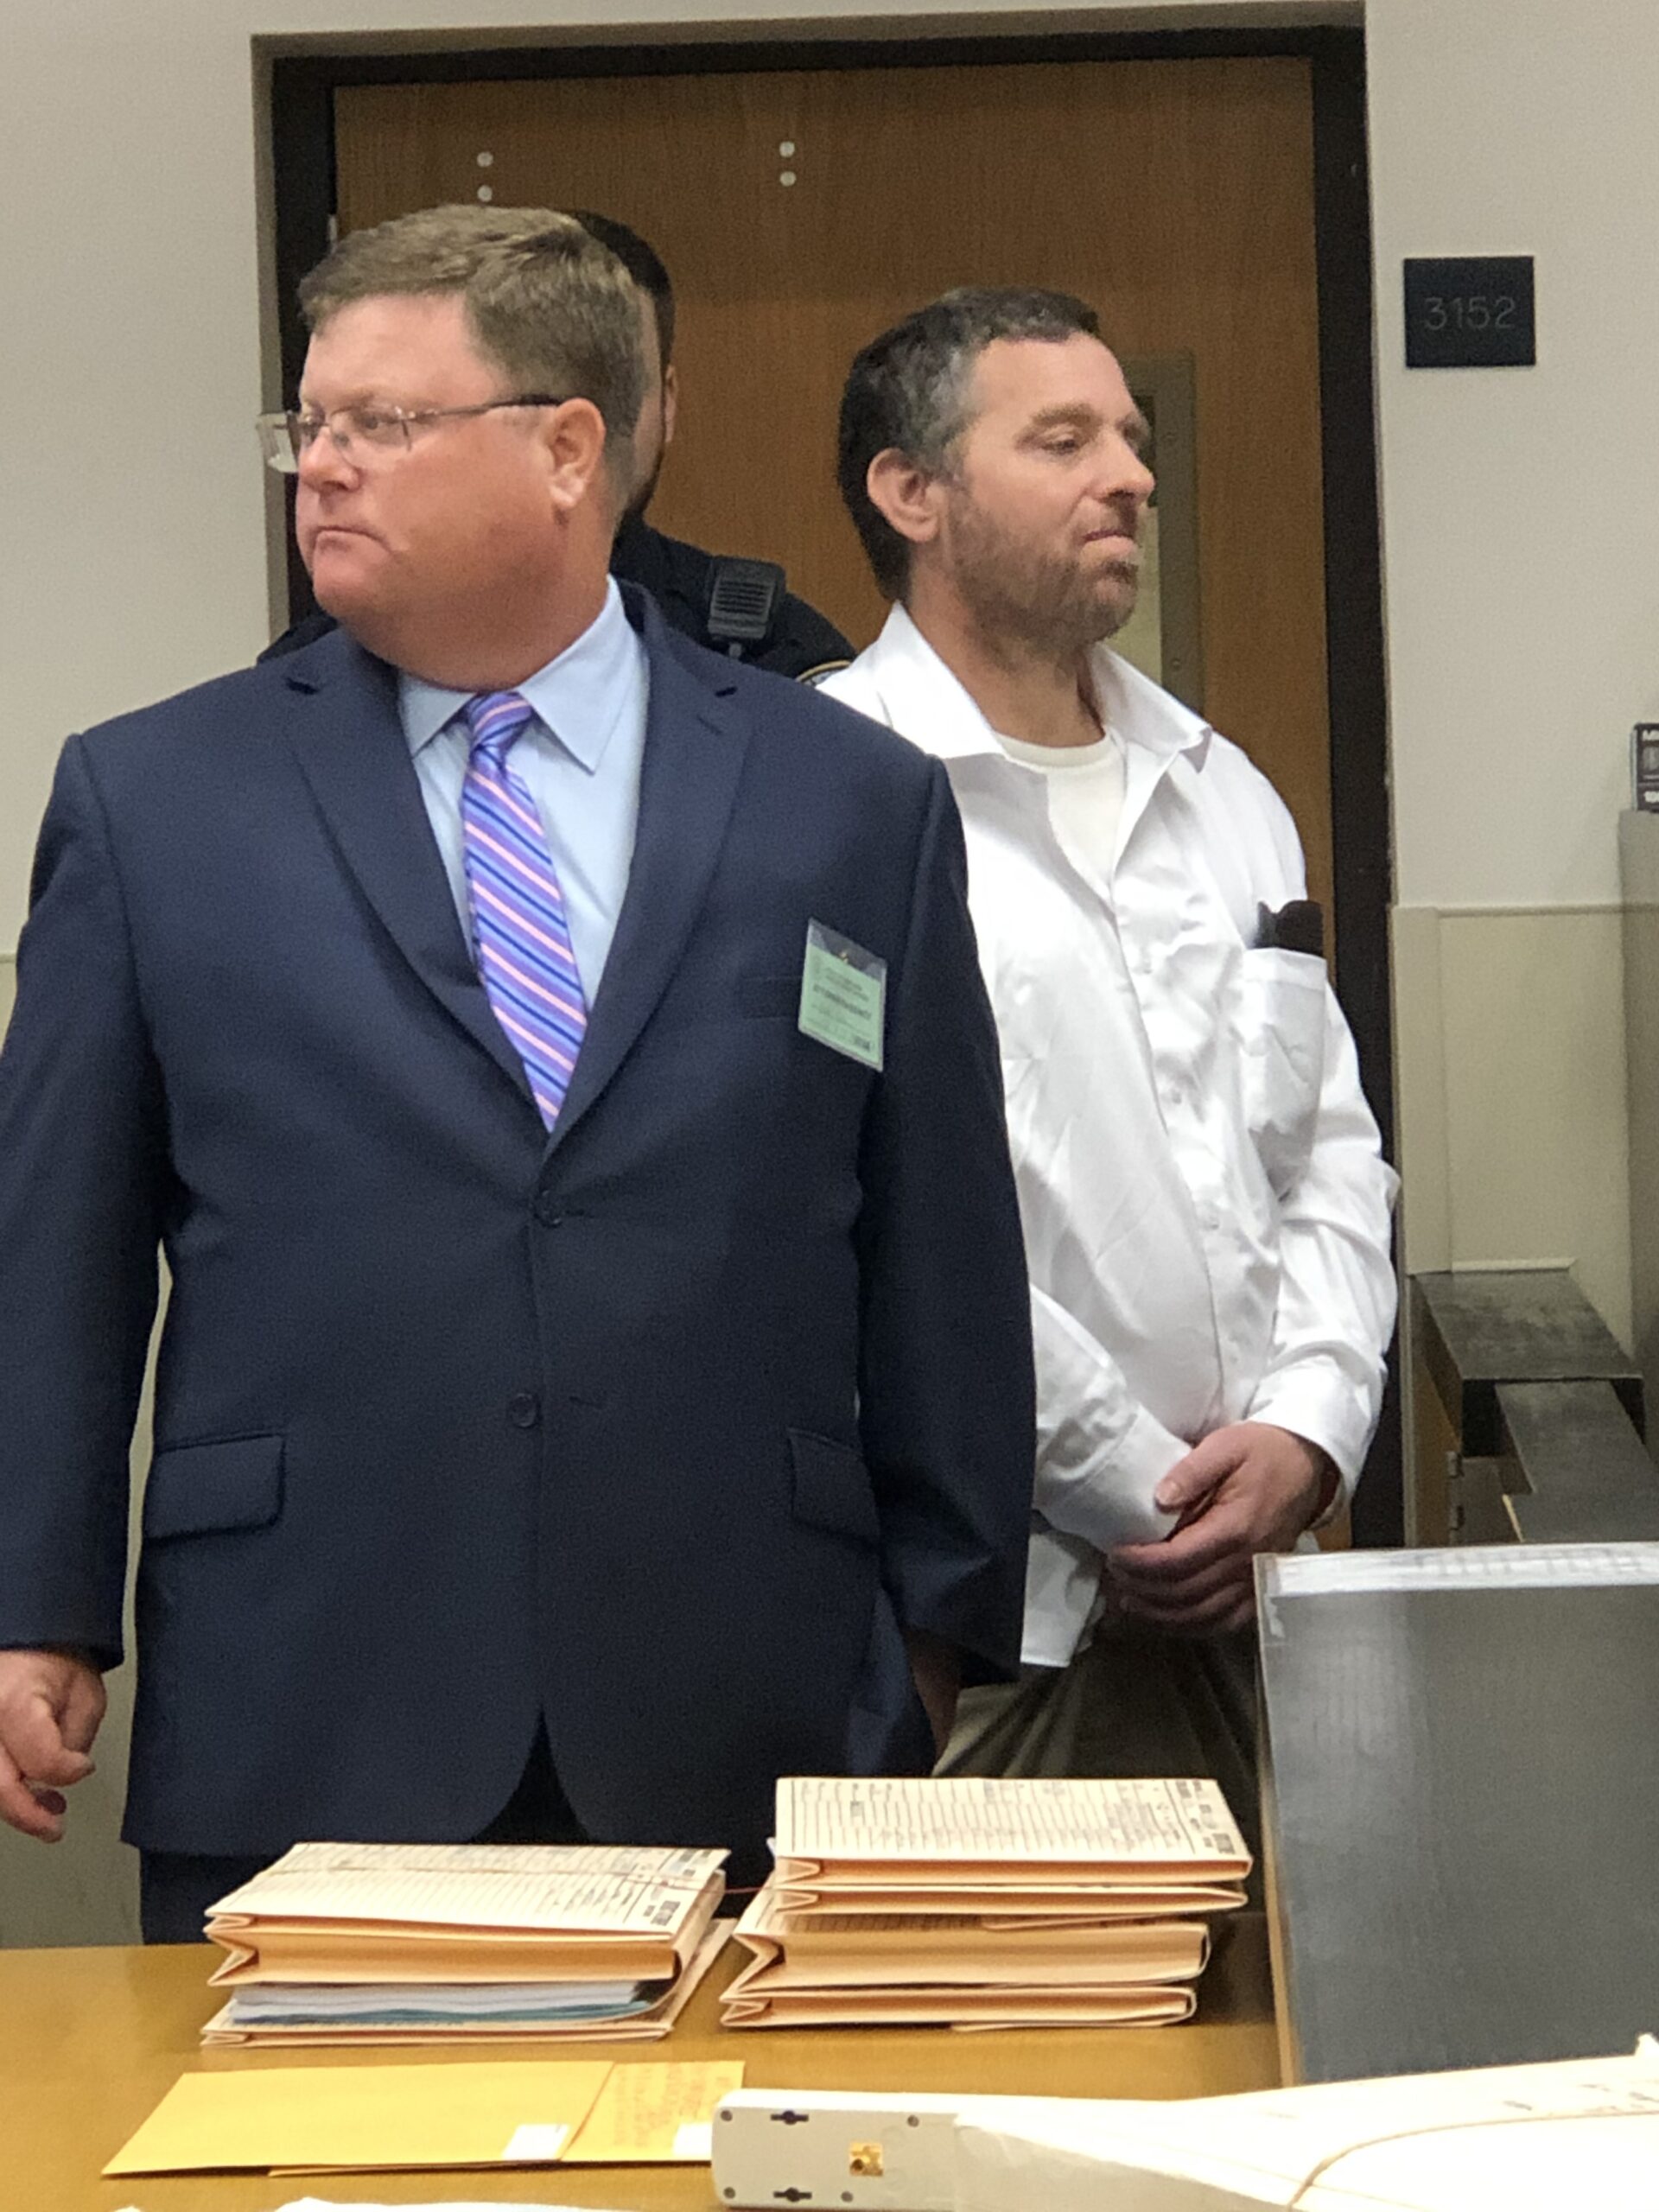 Joseph Grippo was sentenced to 20 years in prison on September 7 for a 2019 murder in Montauk.